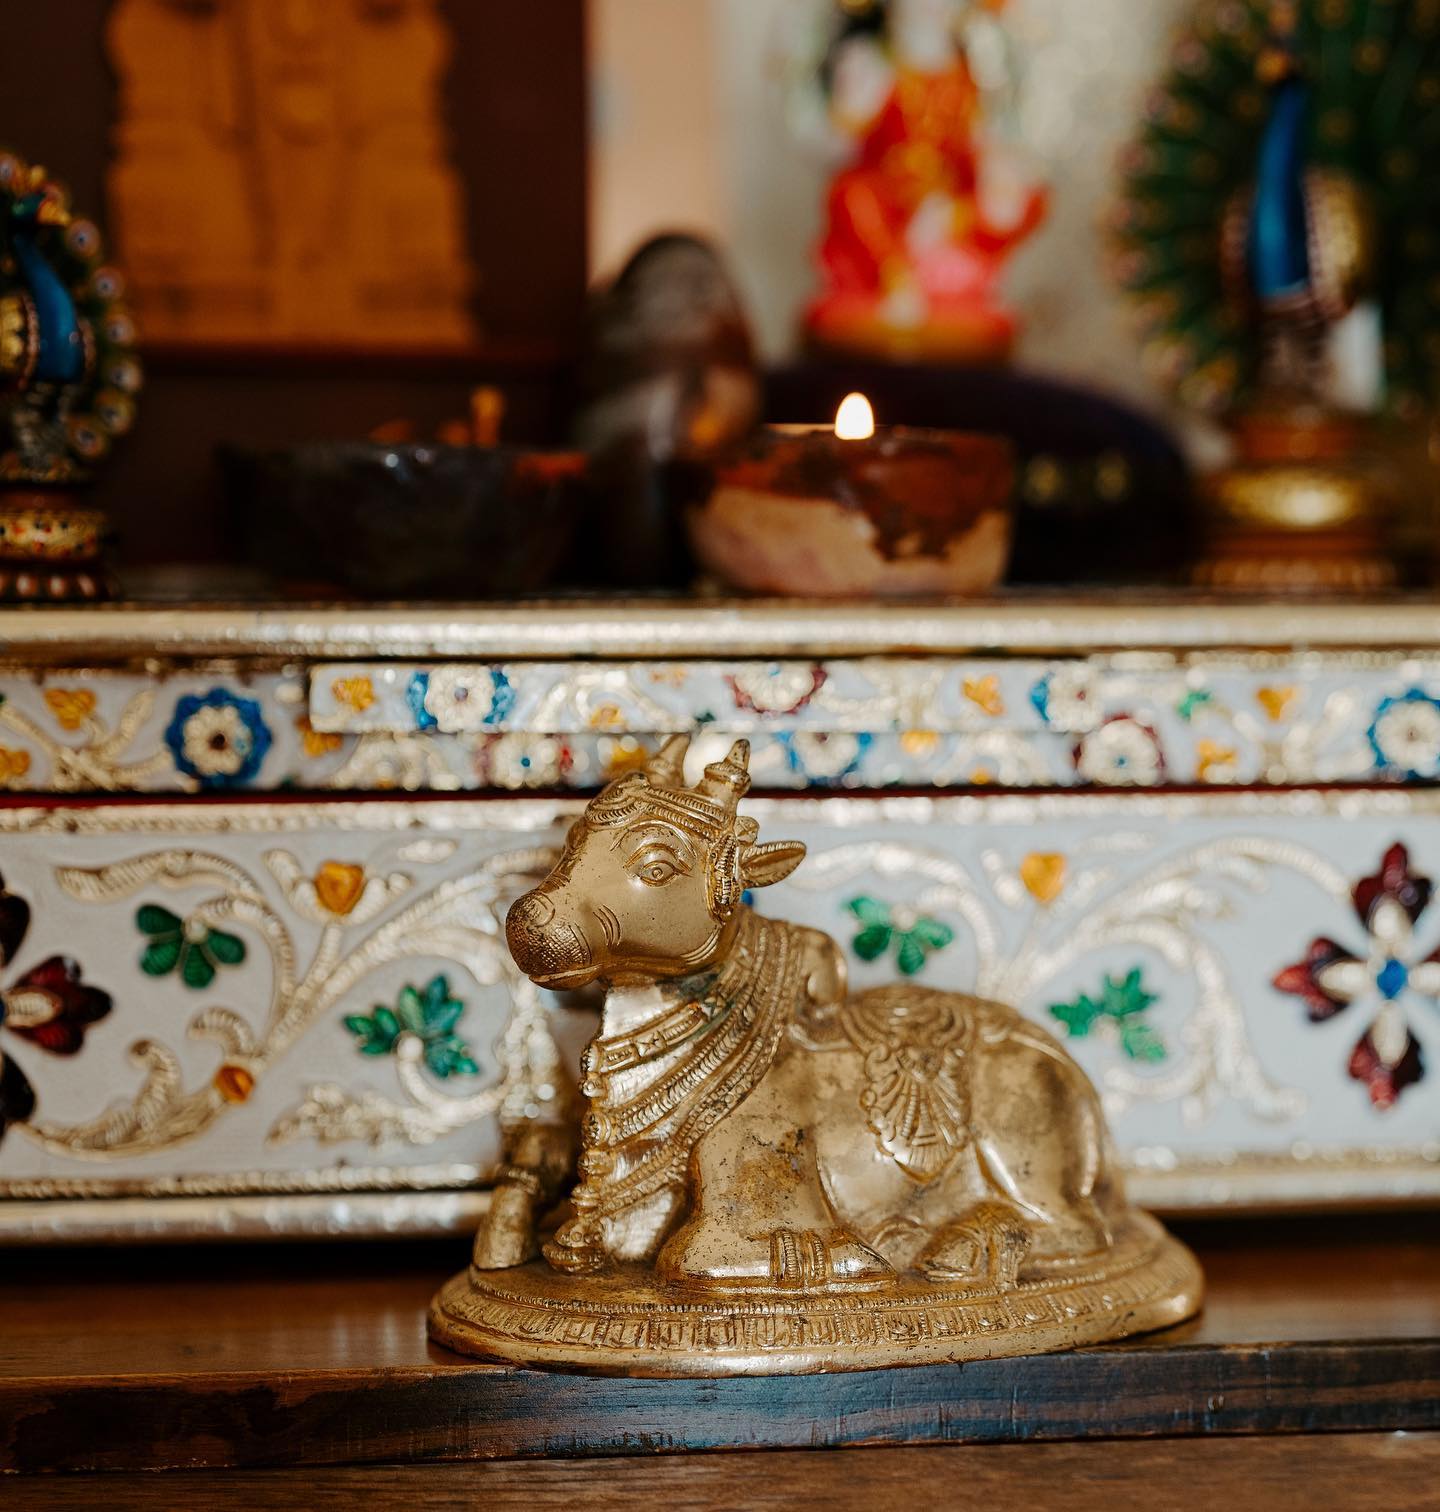 Have you seen our Nandi when visiting the Lakshmi clinic?